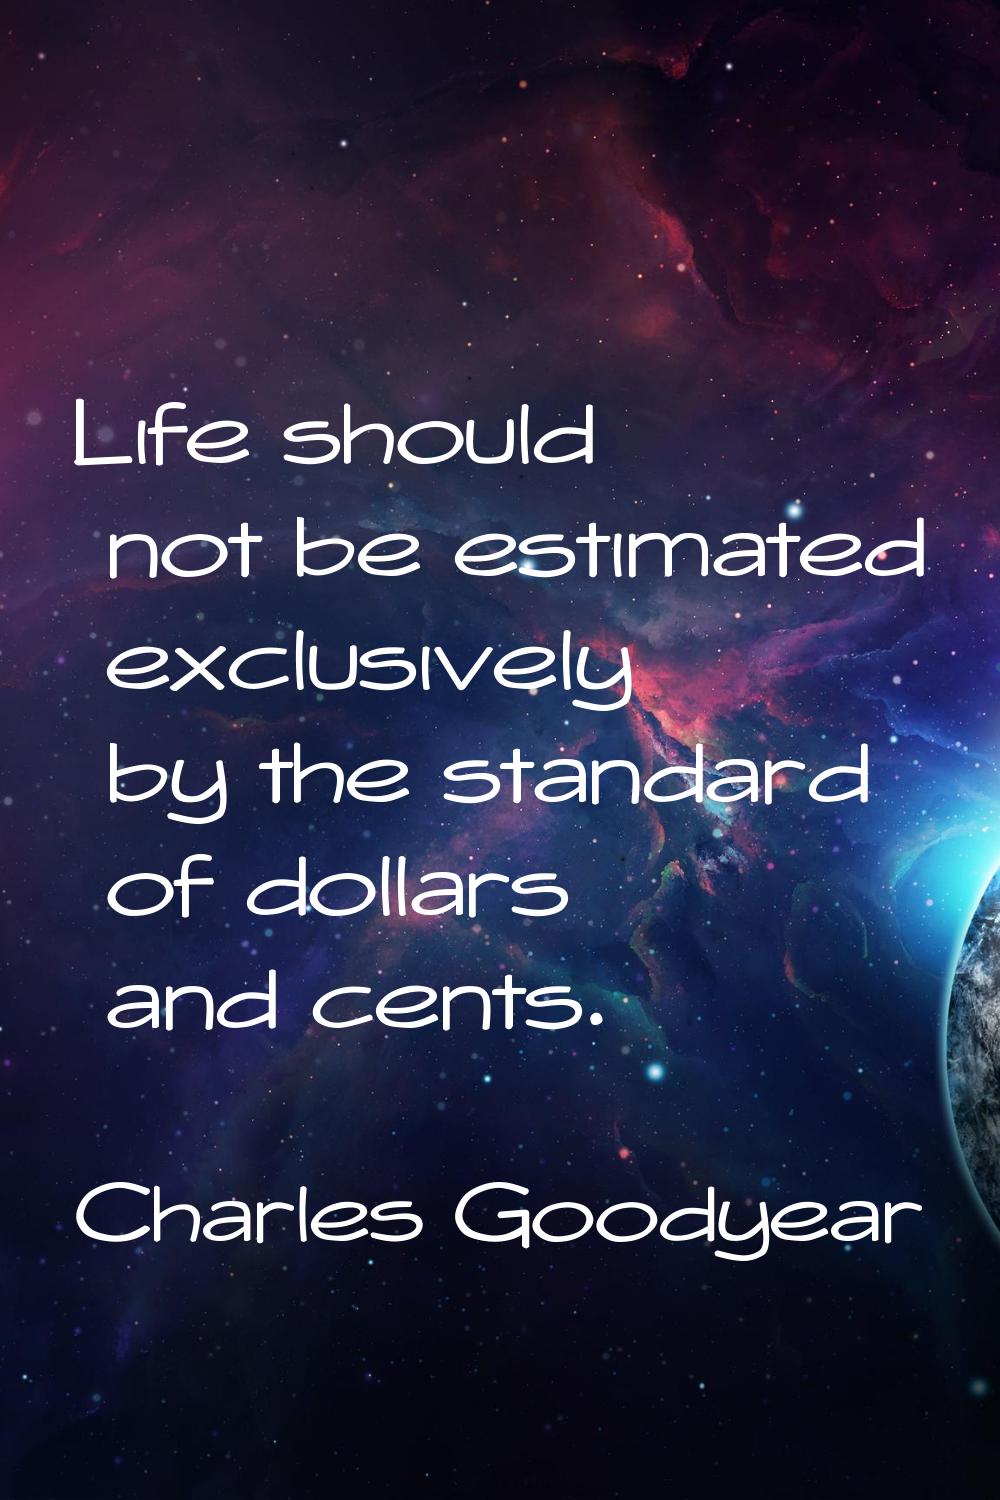 Life should not be estimated exclusively by the standard of dollars and cents.